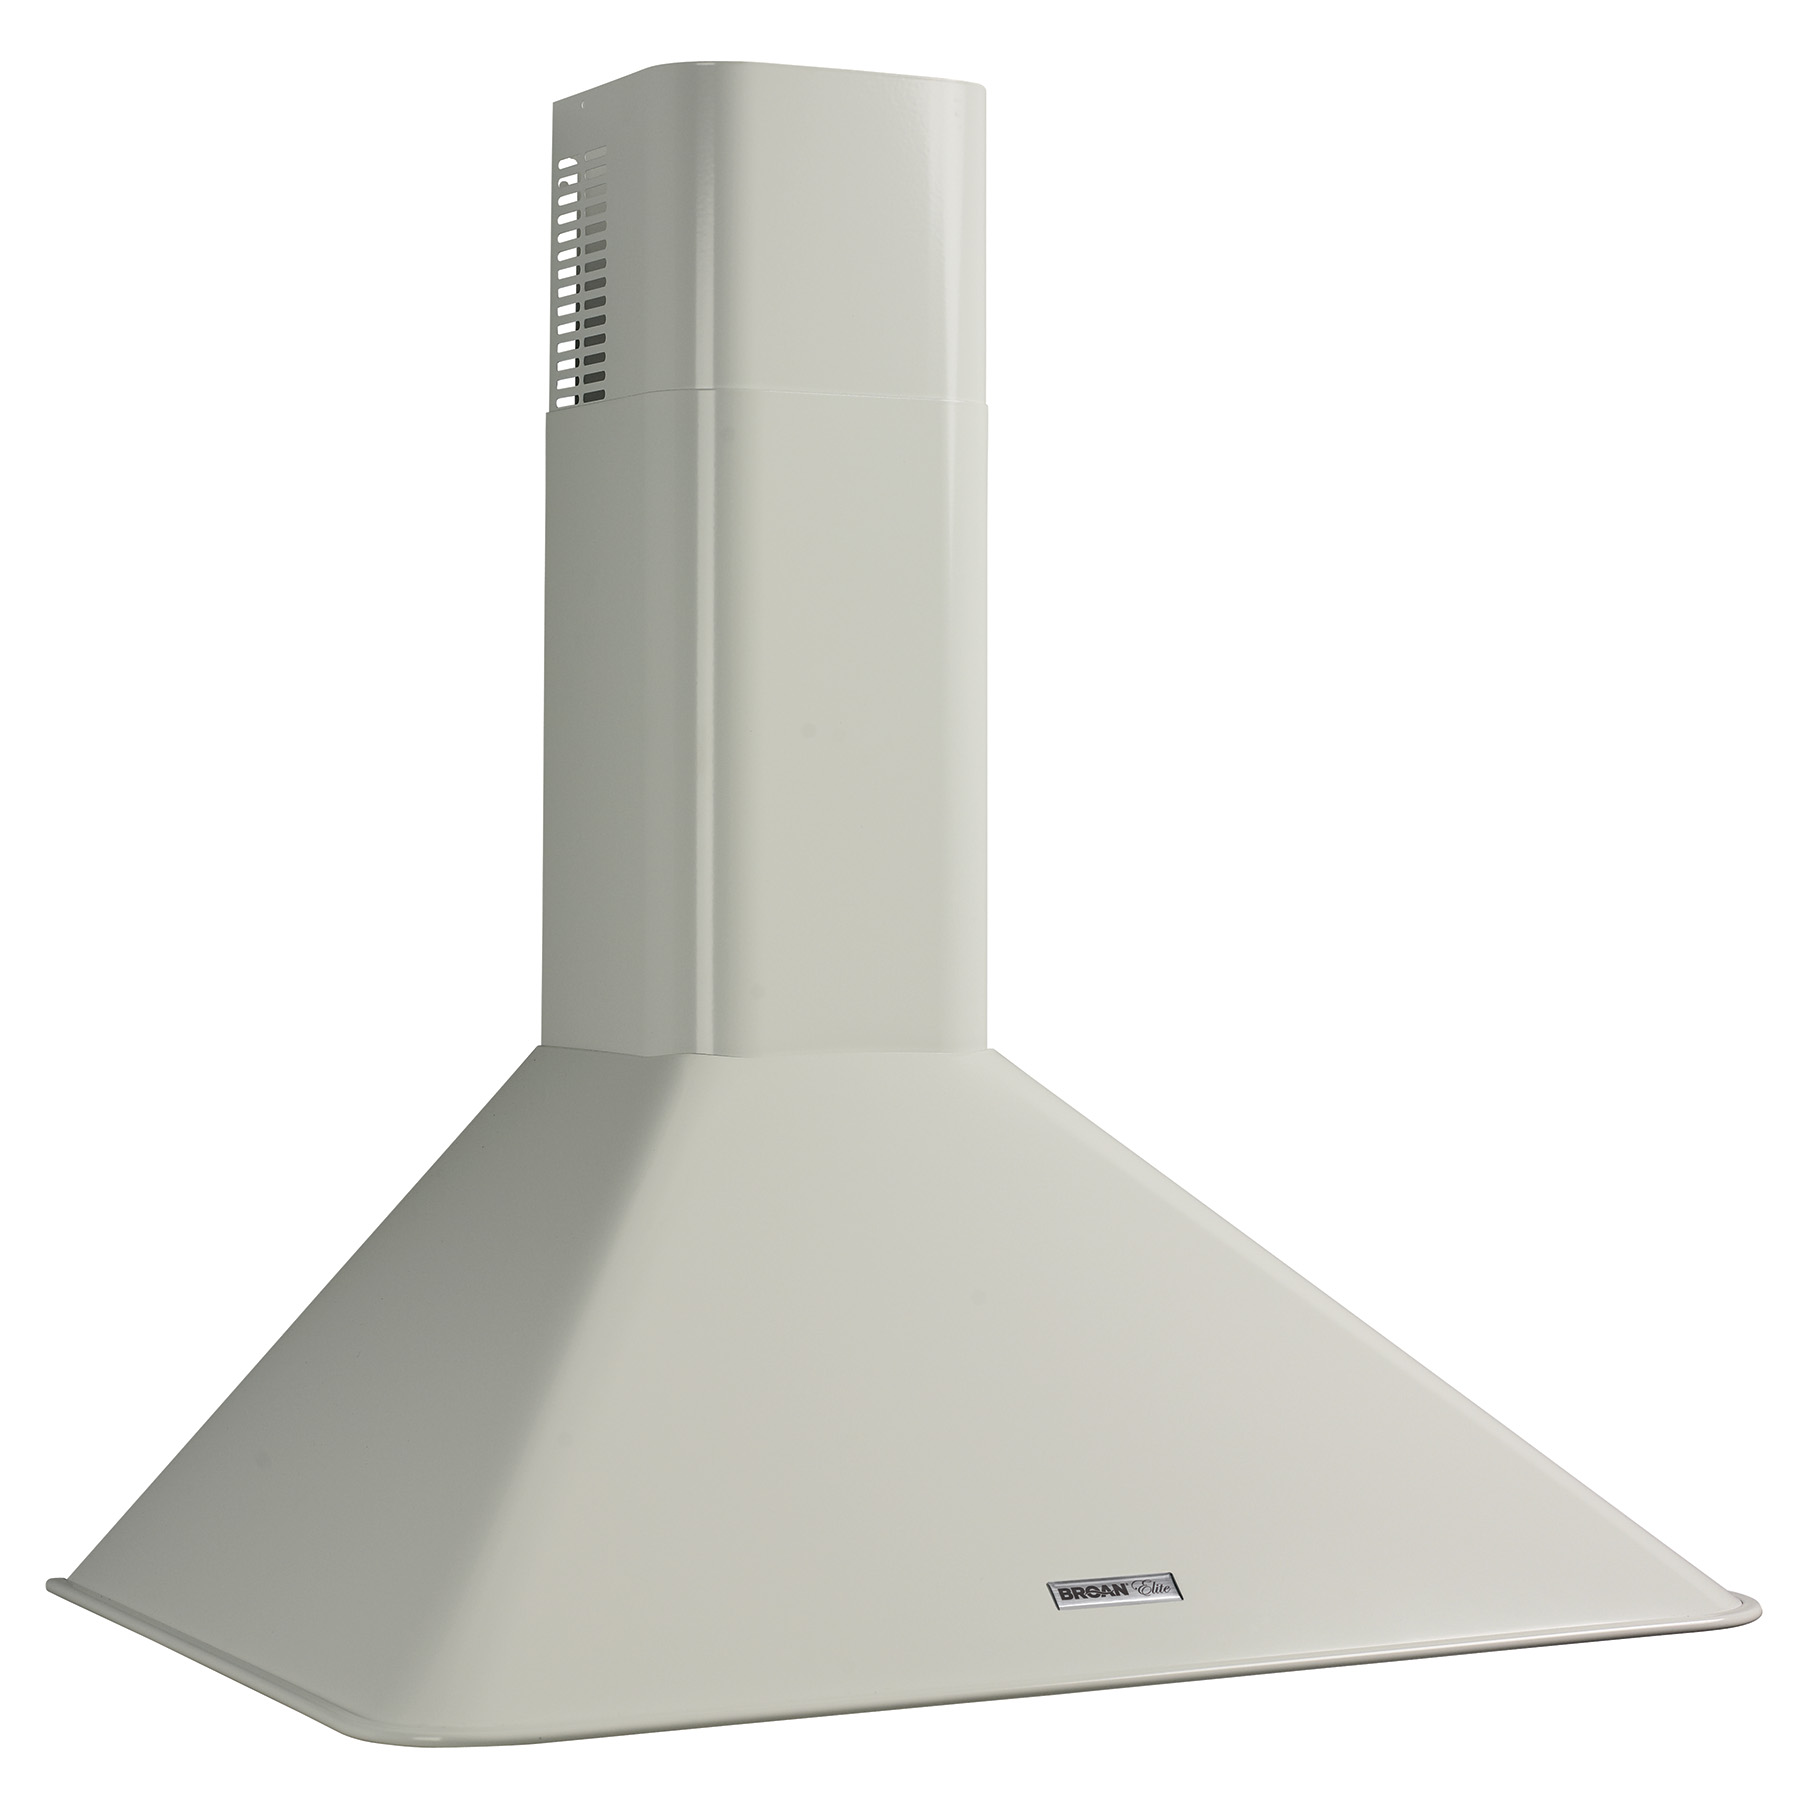 DISCONTINUED: Broan® 290 CFM, 30-Inch Wall-Mounted Chimney Hood in White